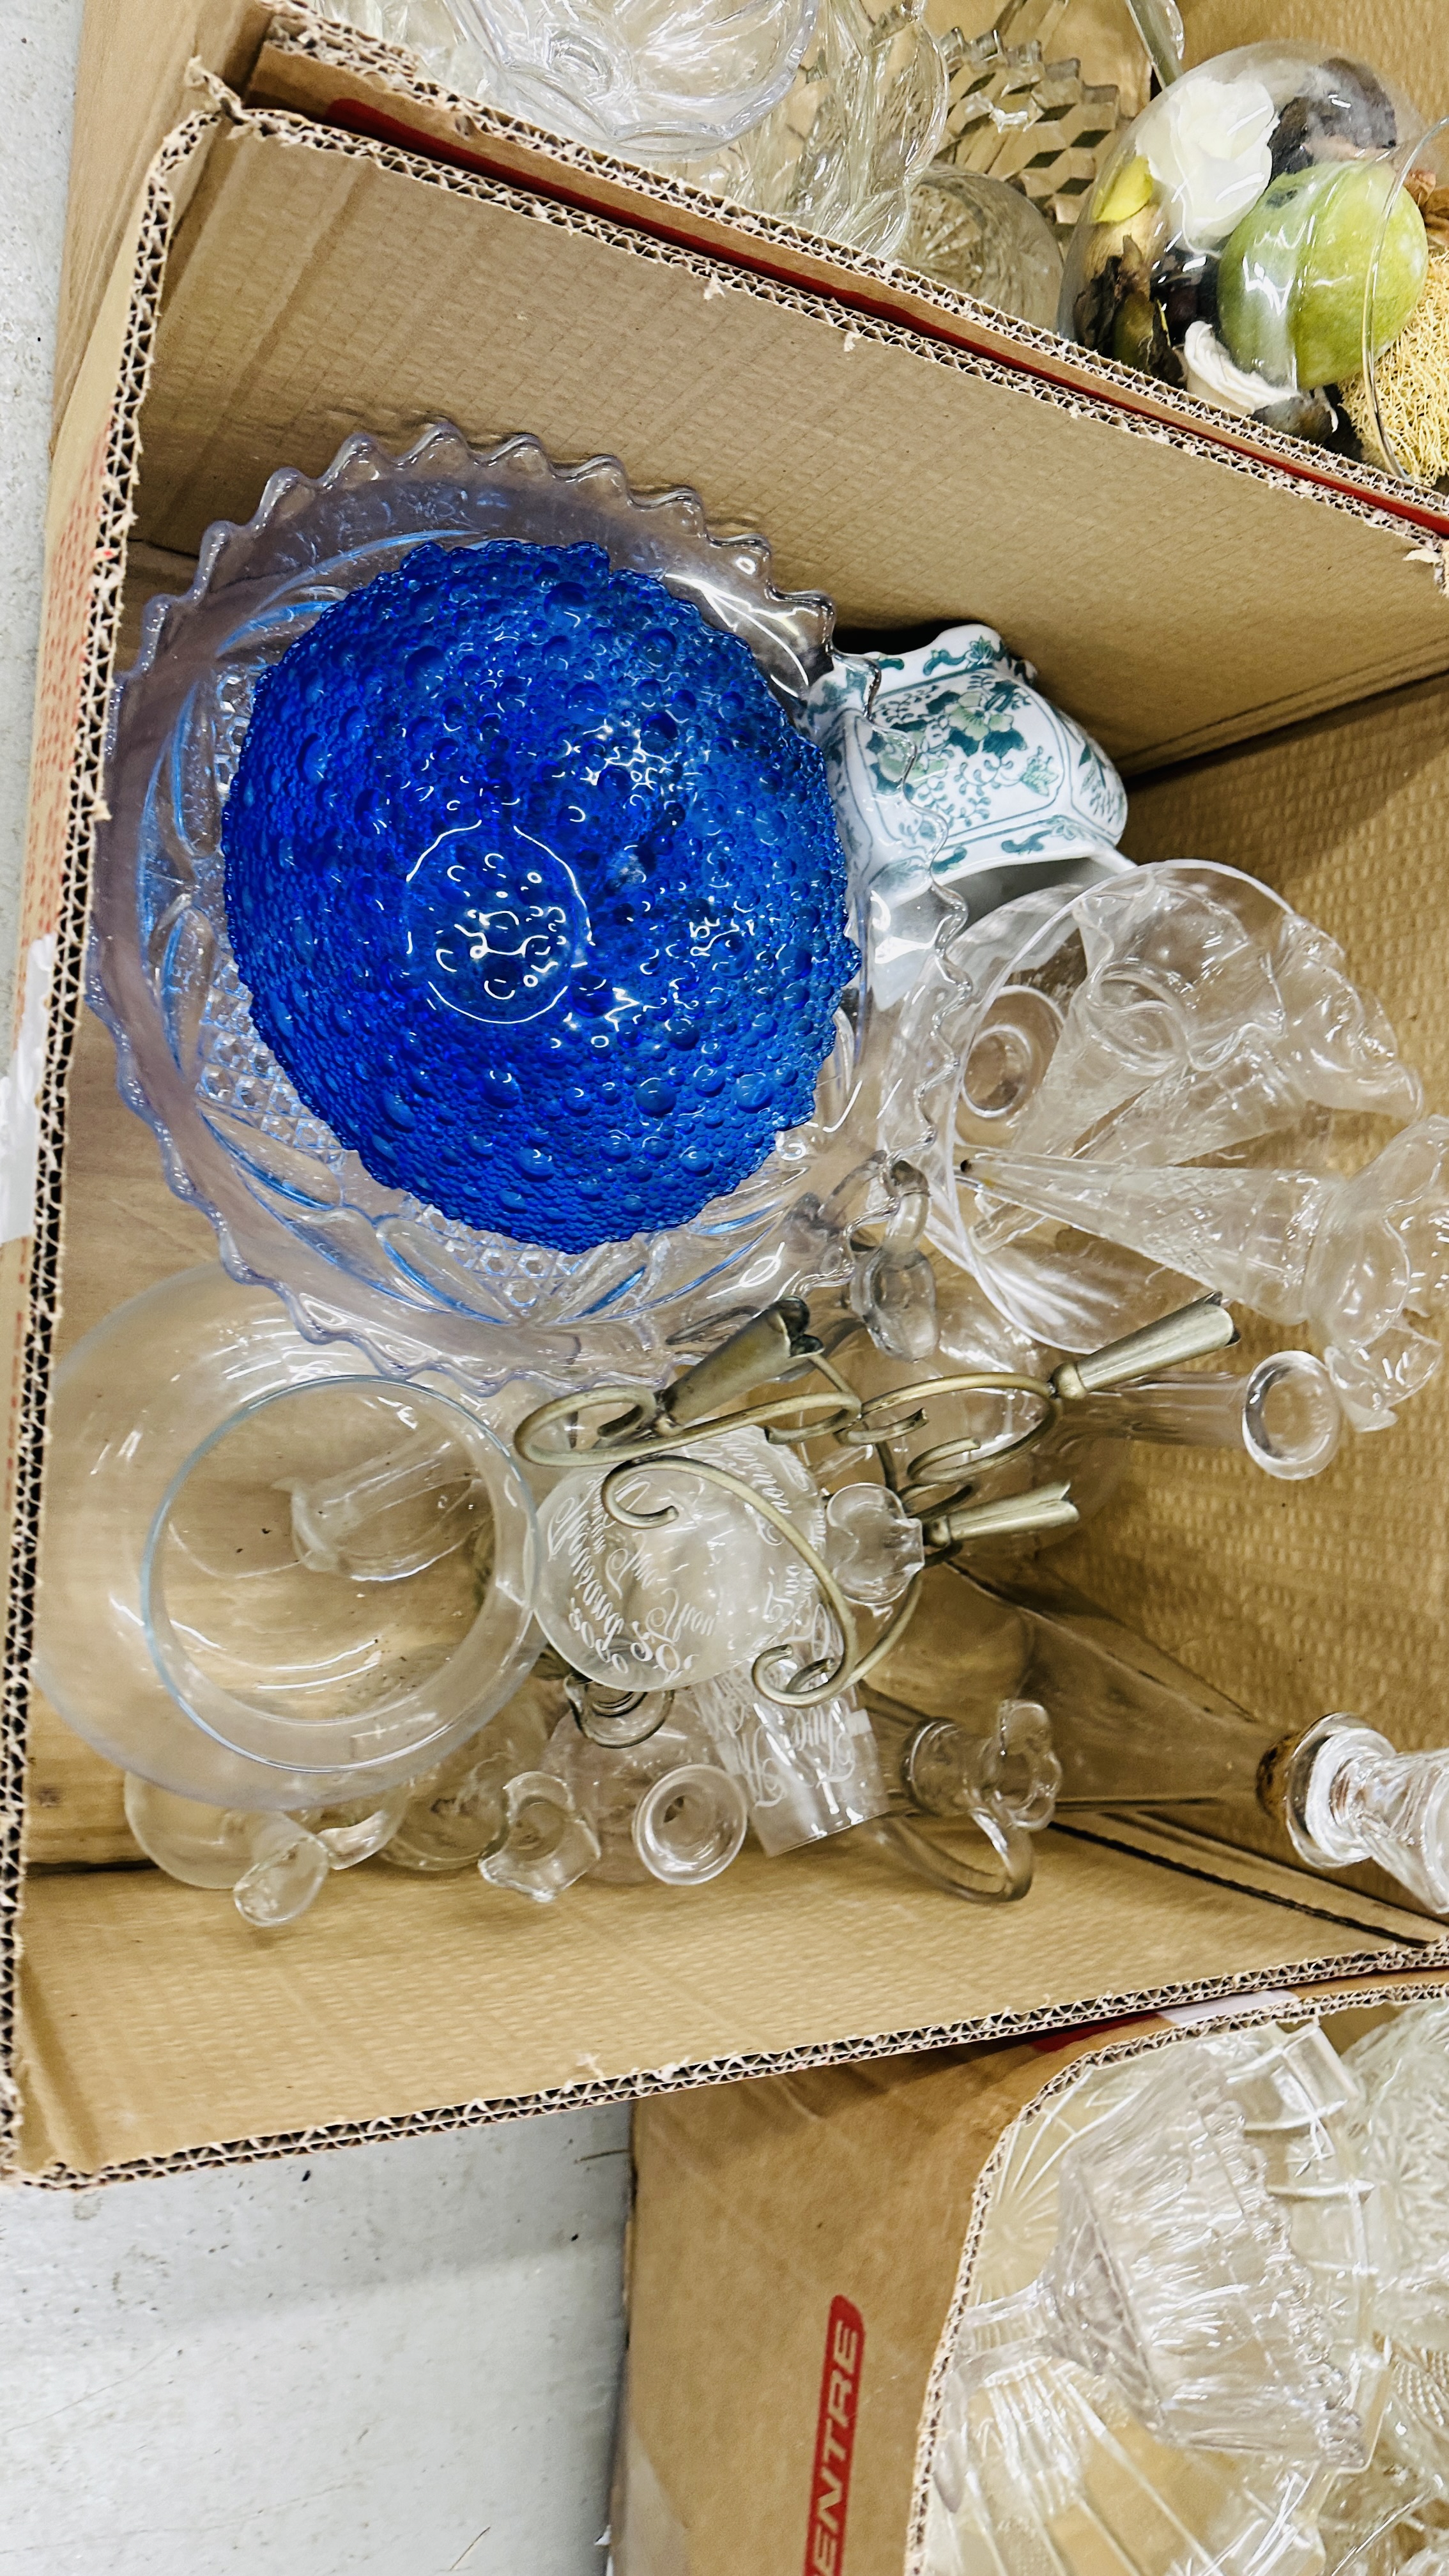 FOUR BOXES CONTAINING AN EXTENSIVE COLLECTION OF PRESSED GLASSWARE TO INCLUDE TAZZA'S, DECANTERS, - Image 3 of 6